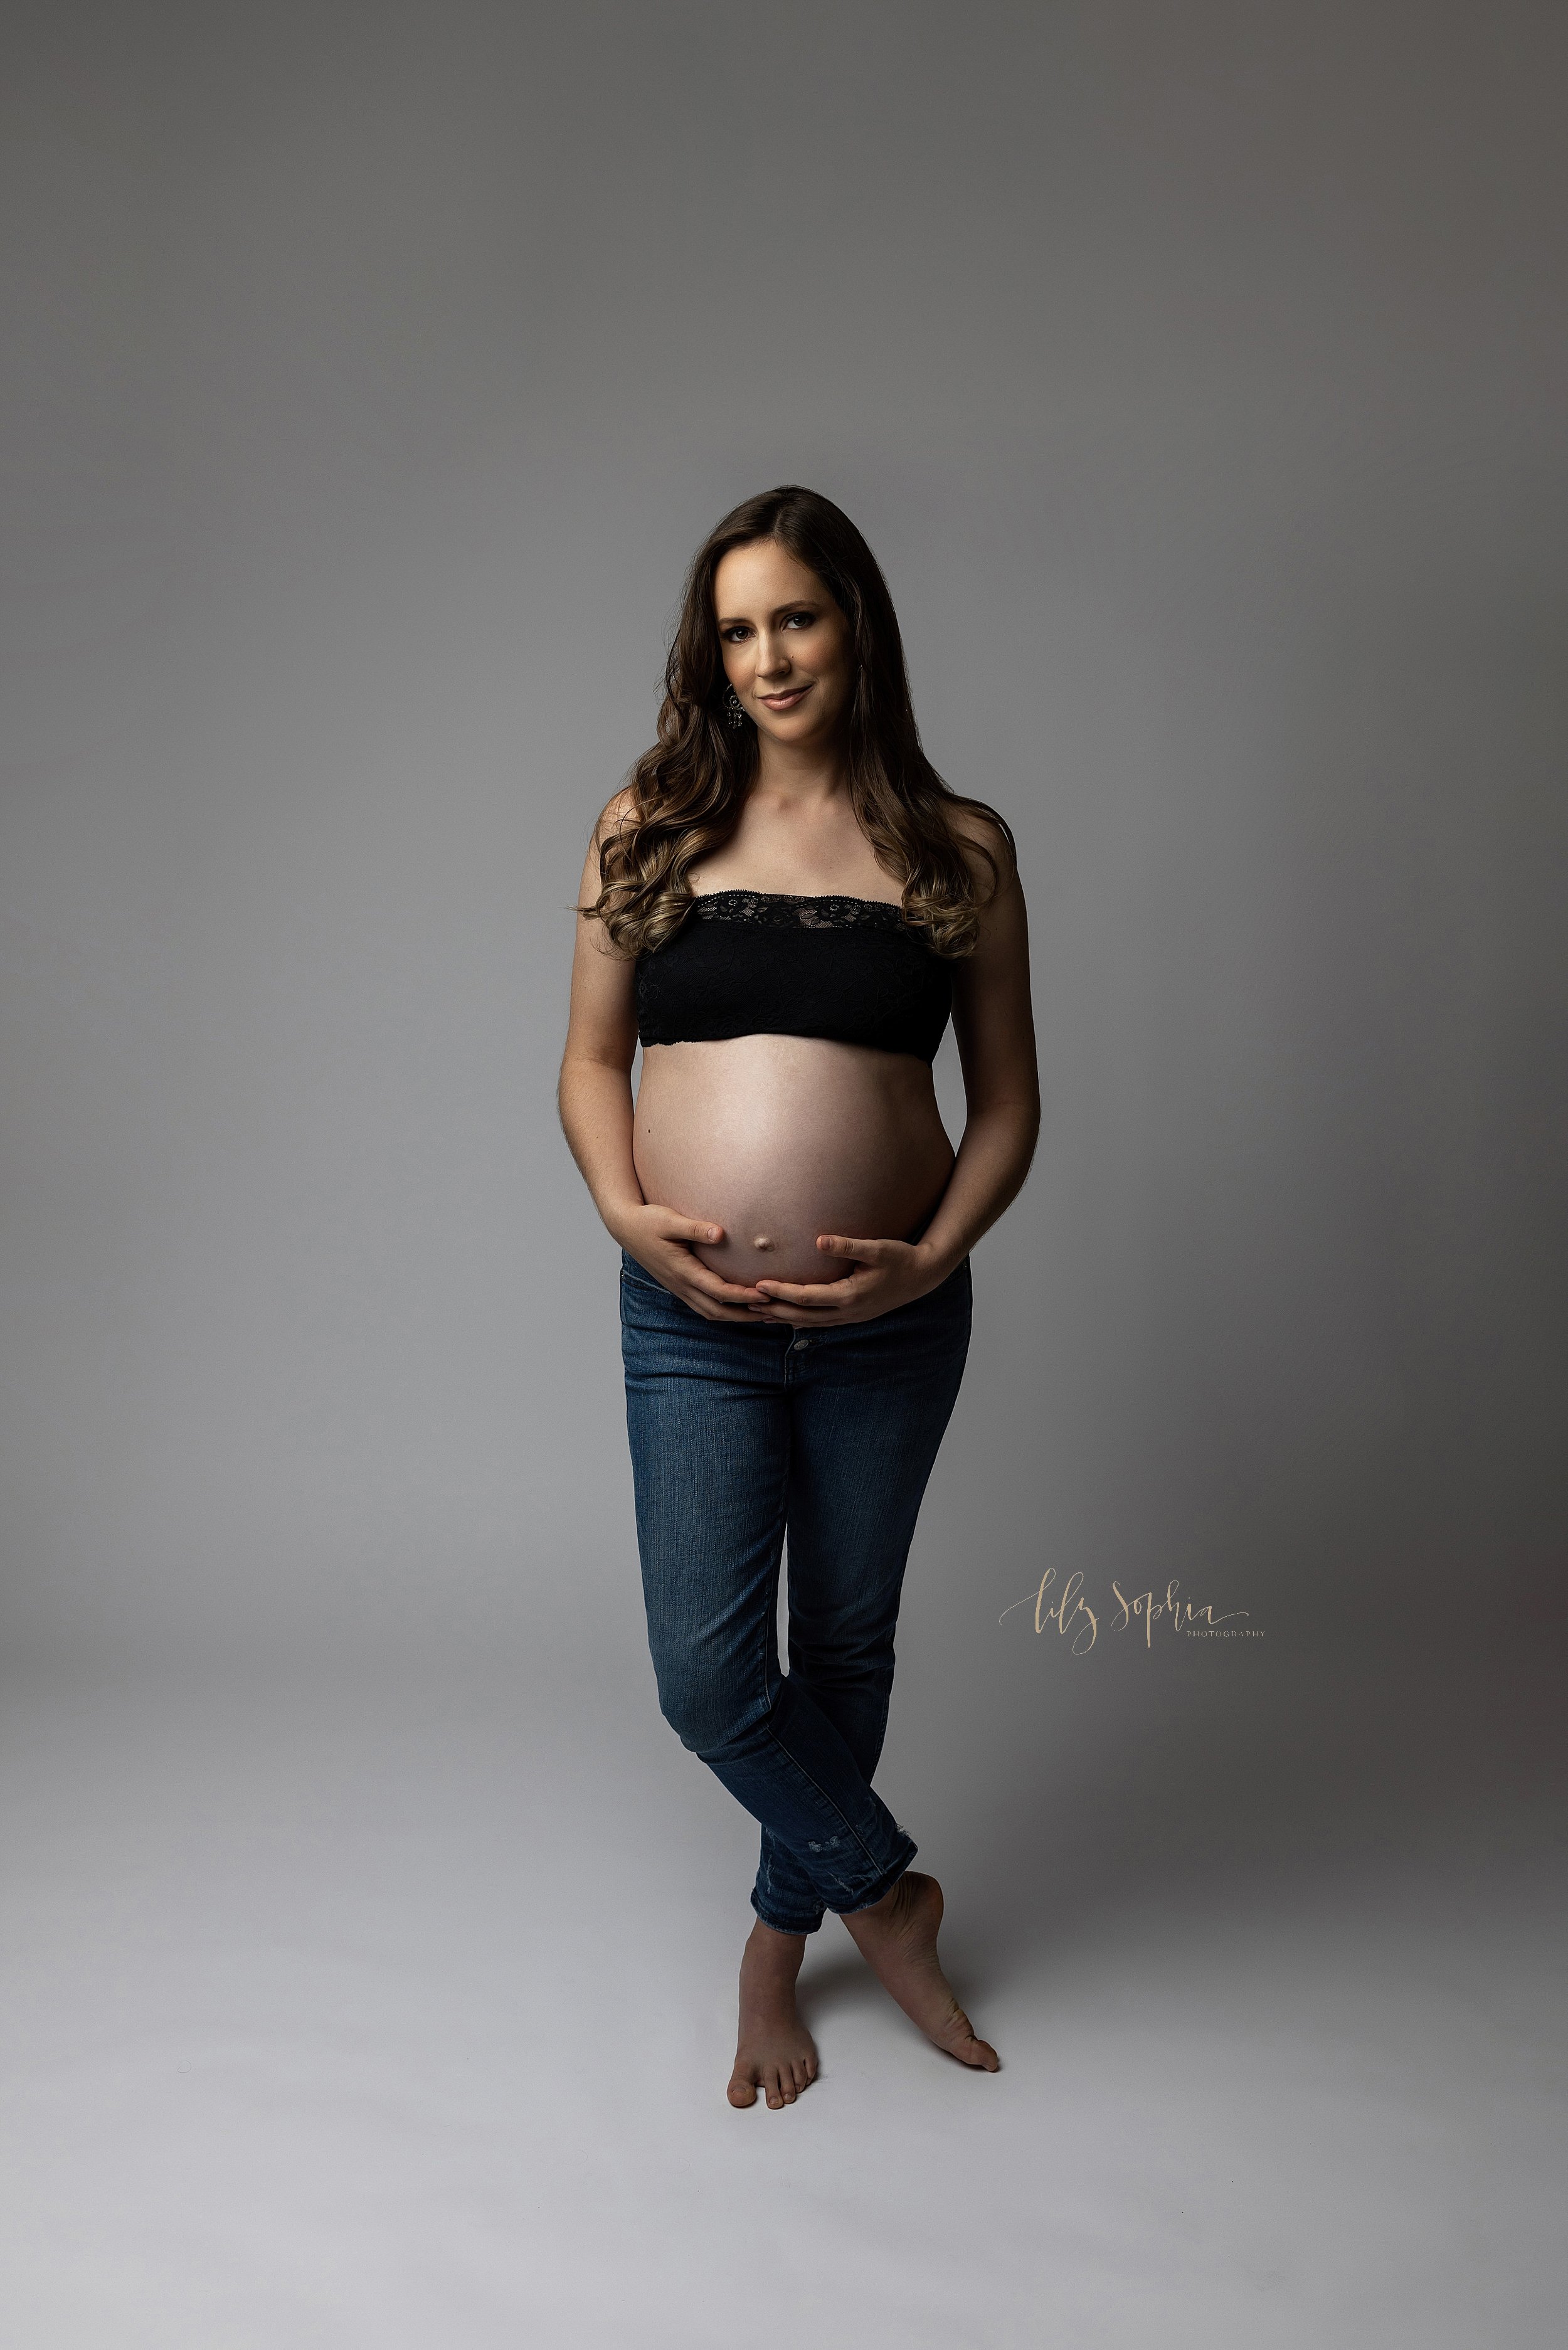  Modern maternity photo of a pregnant woman as she stands in a natural light studio wearing a black bandeau bra and a pair of button-downed blue jeans while holding the base of her belly with her hands and crossing her legs near her ankles while bare